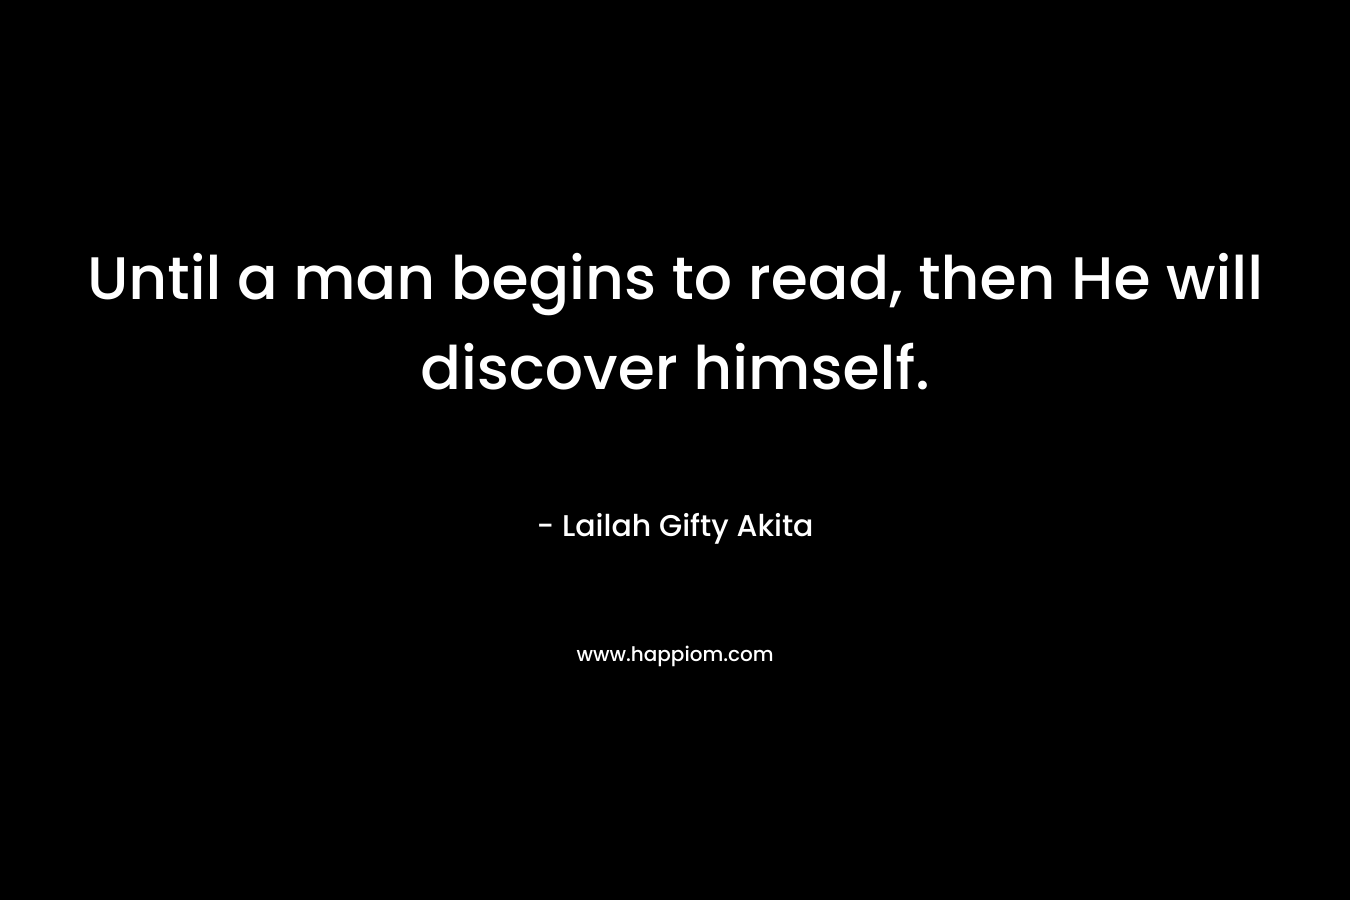 Until a man begins to read, then He will discover himself.